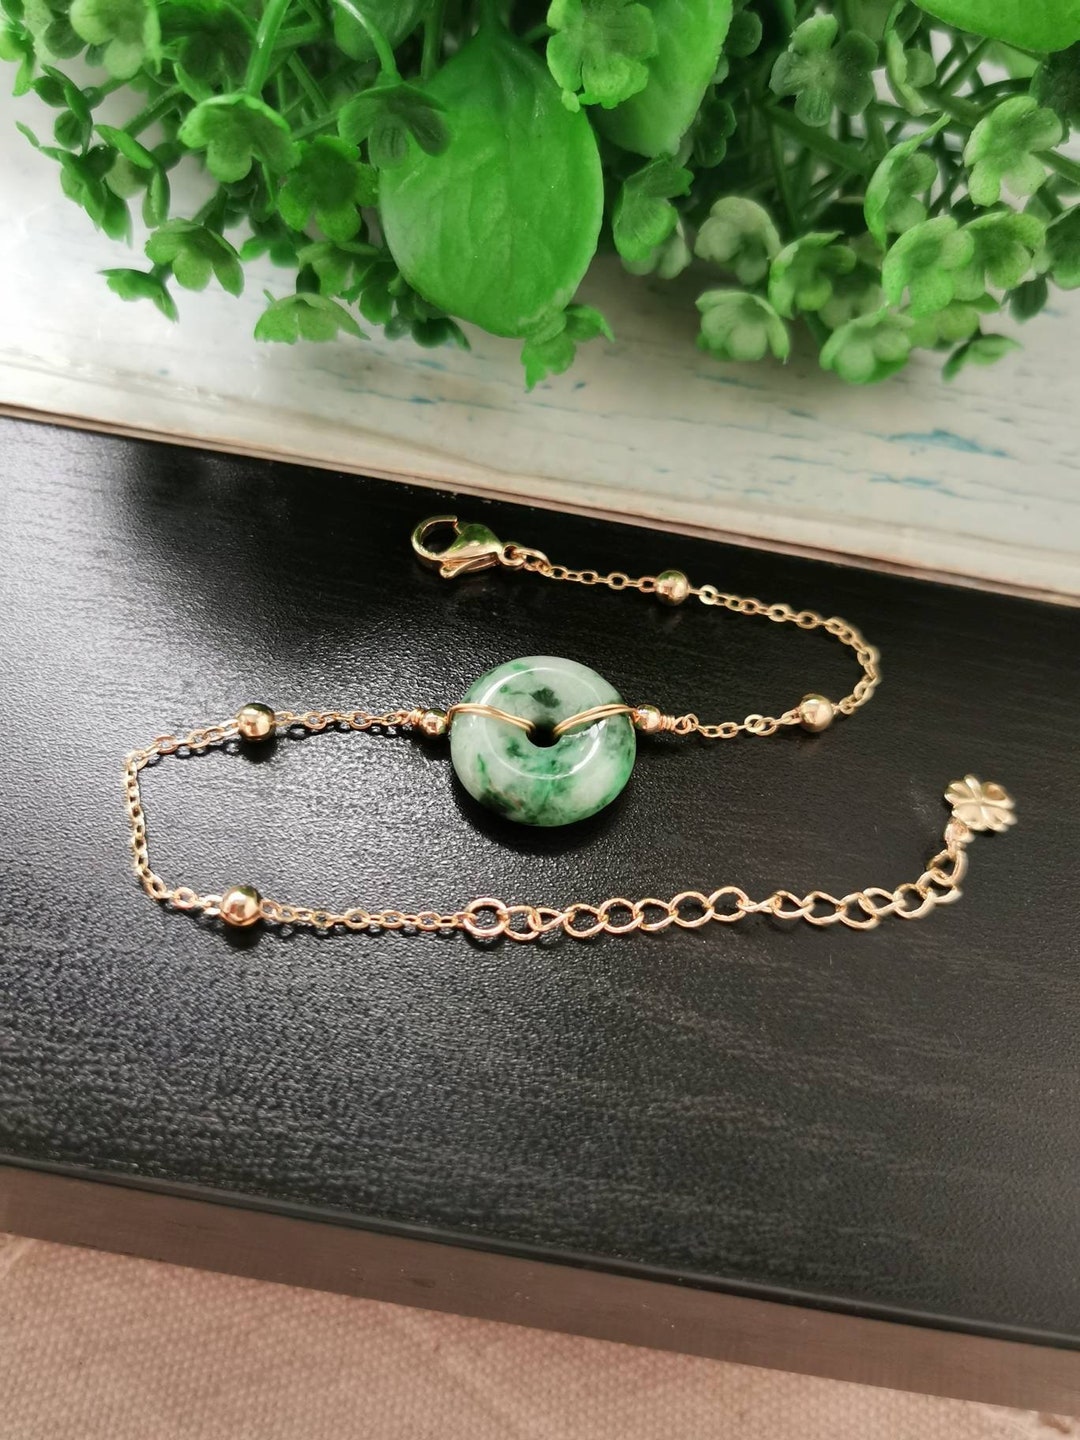 Floral Green Type A Grade A Natural Jadeite Jade Fei Cui Donut Bracelet in  14K Gold Filled Bail Setting - Etsy